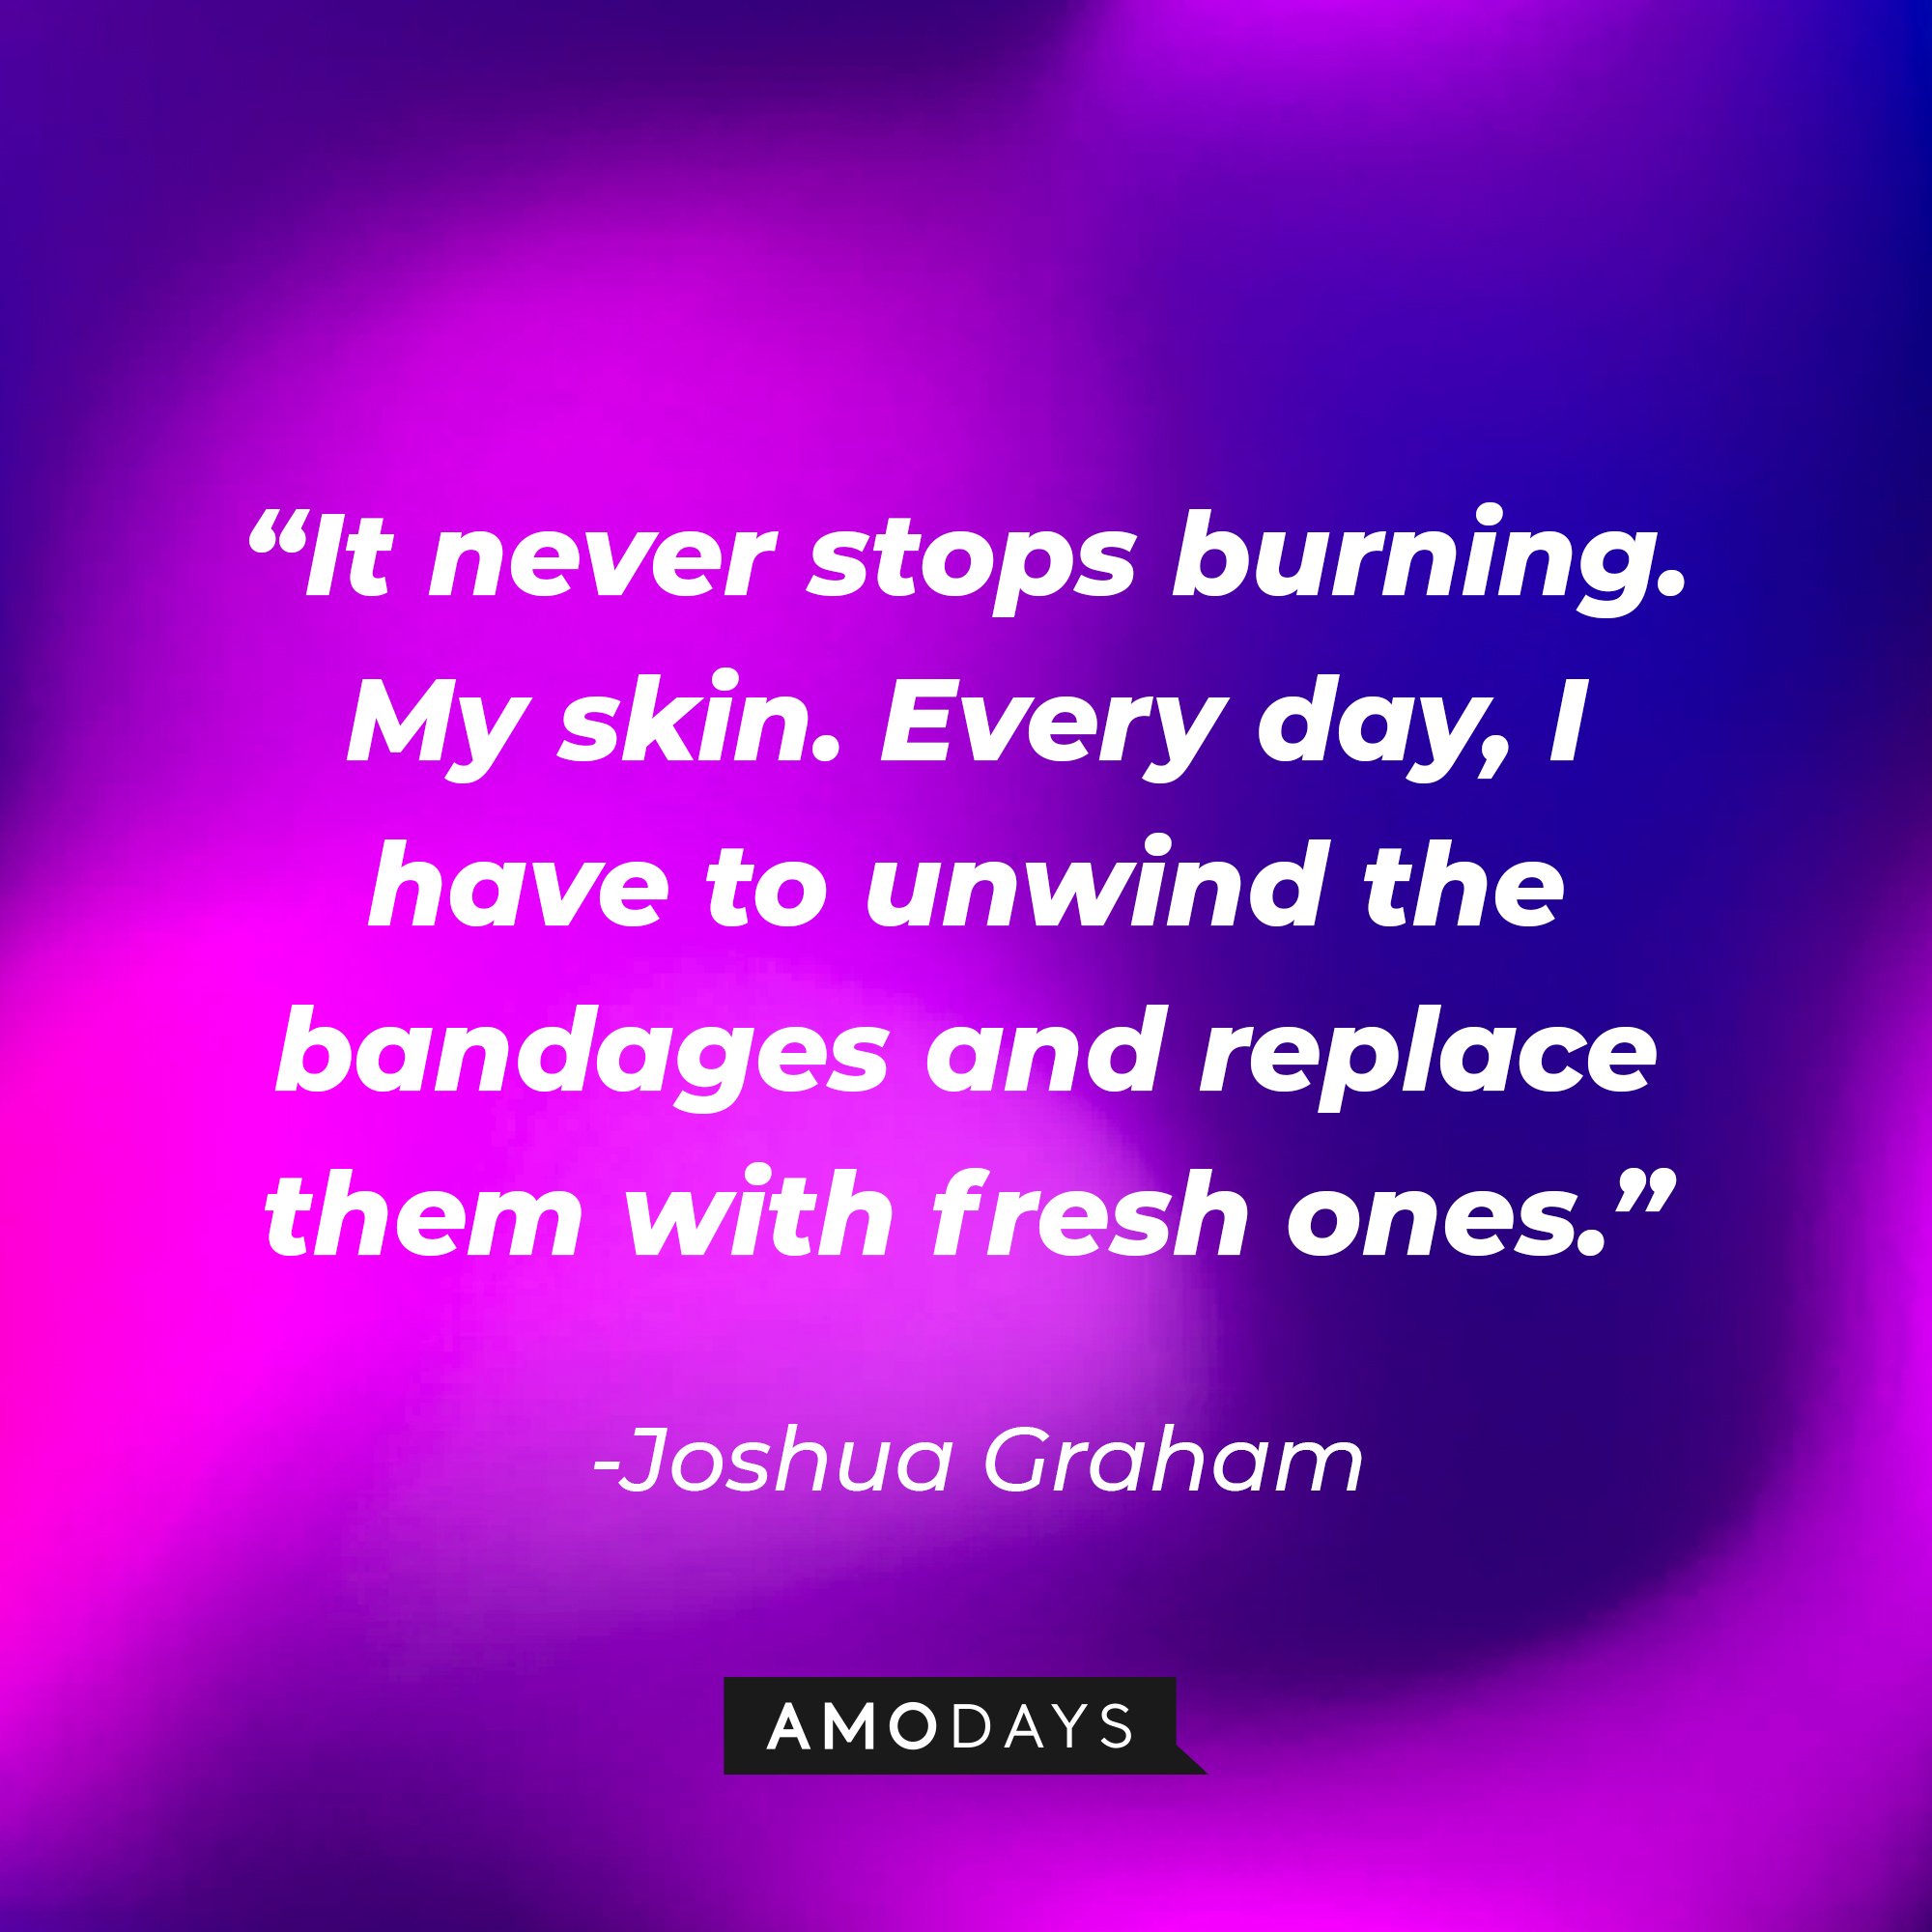 Joshua Graham's quote: “It never stops burning. My skin. Every day, I have to unwind the bandages and replace them with fresh ones.”   | Source: Amodays